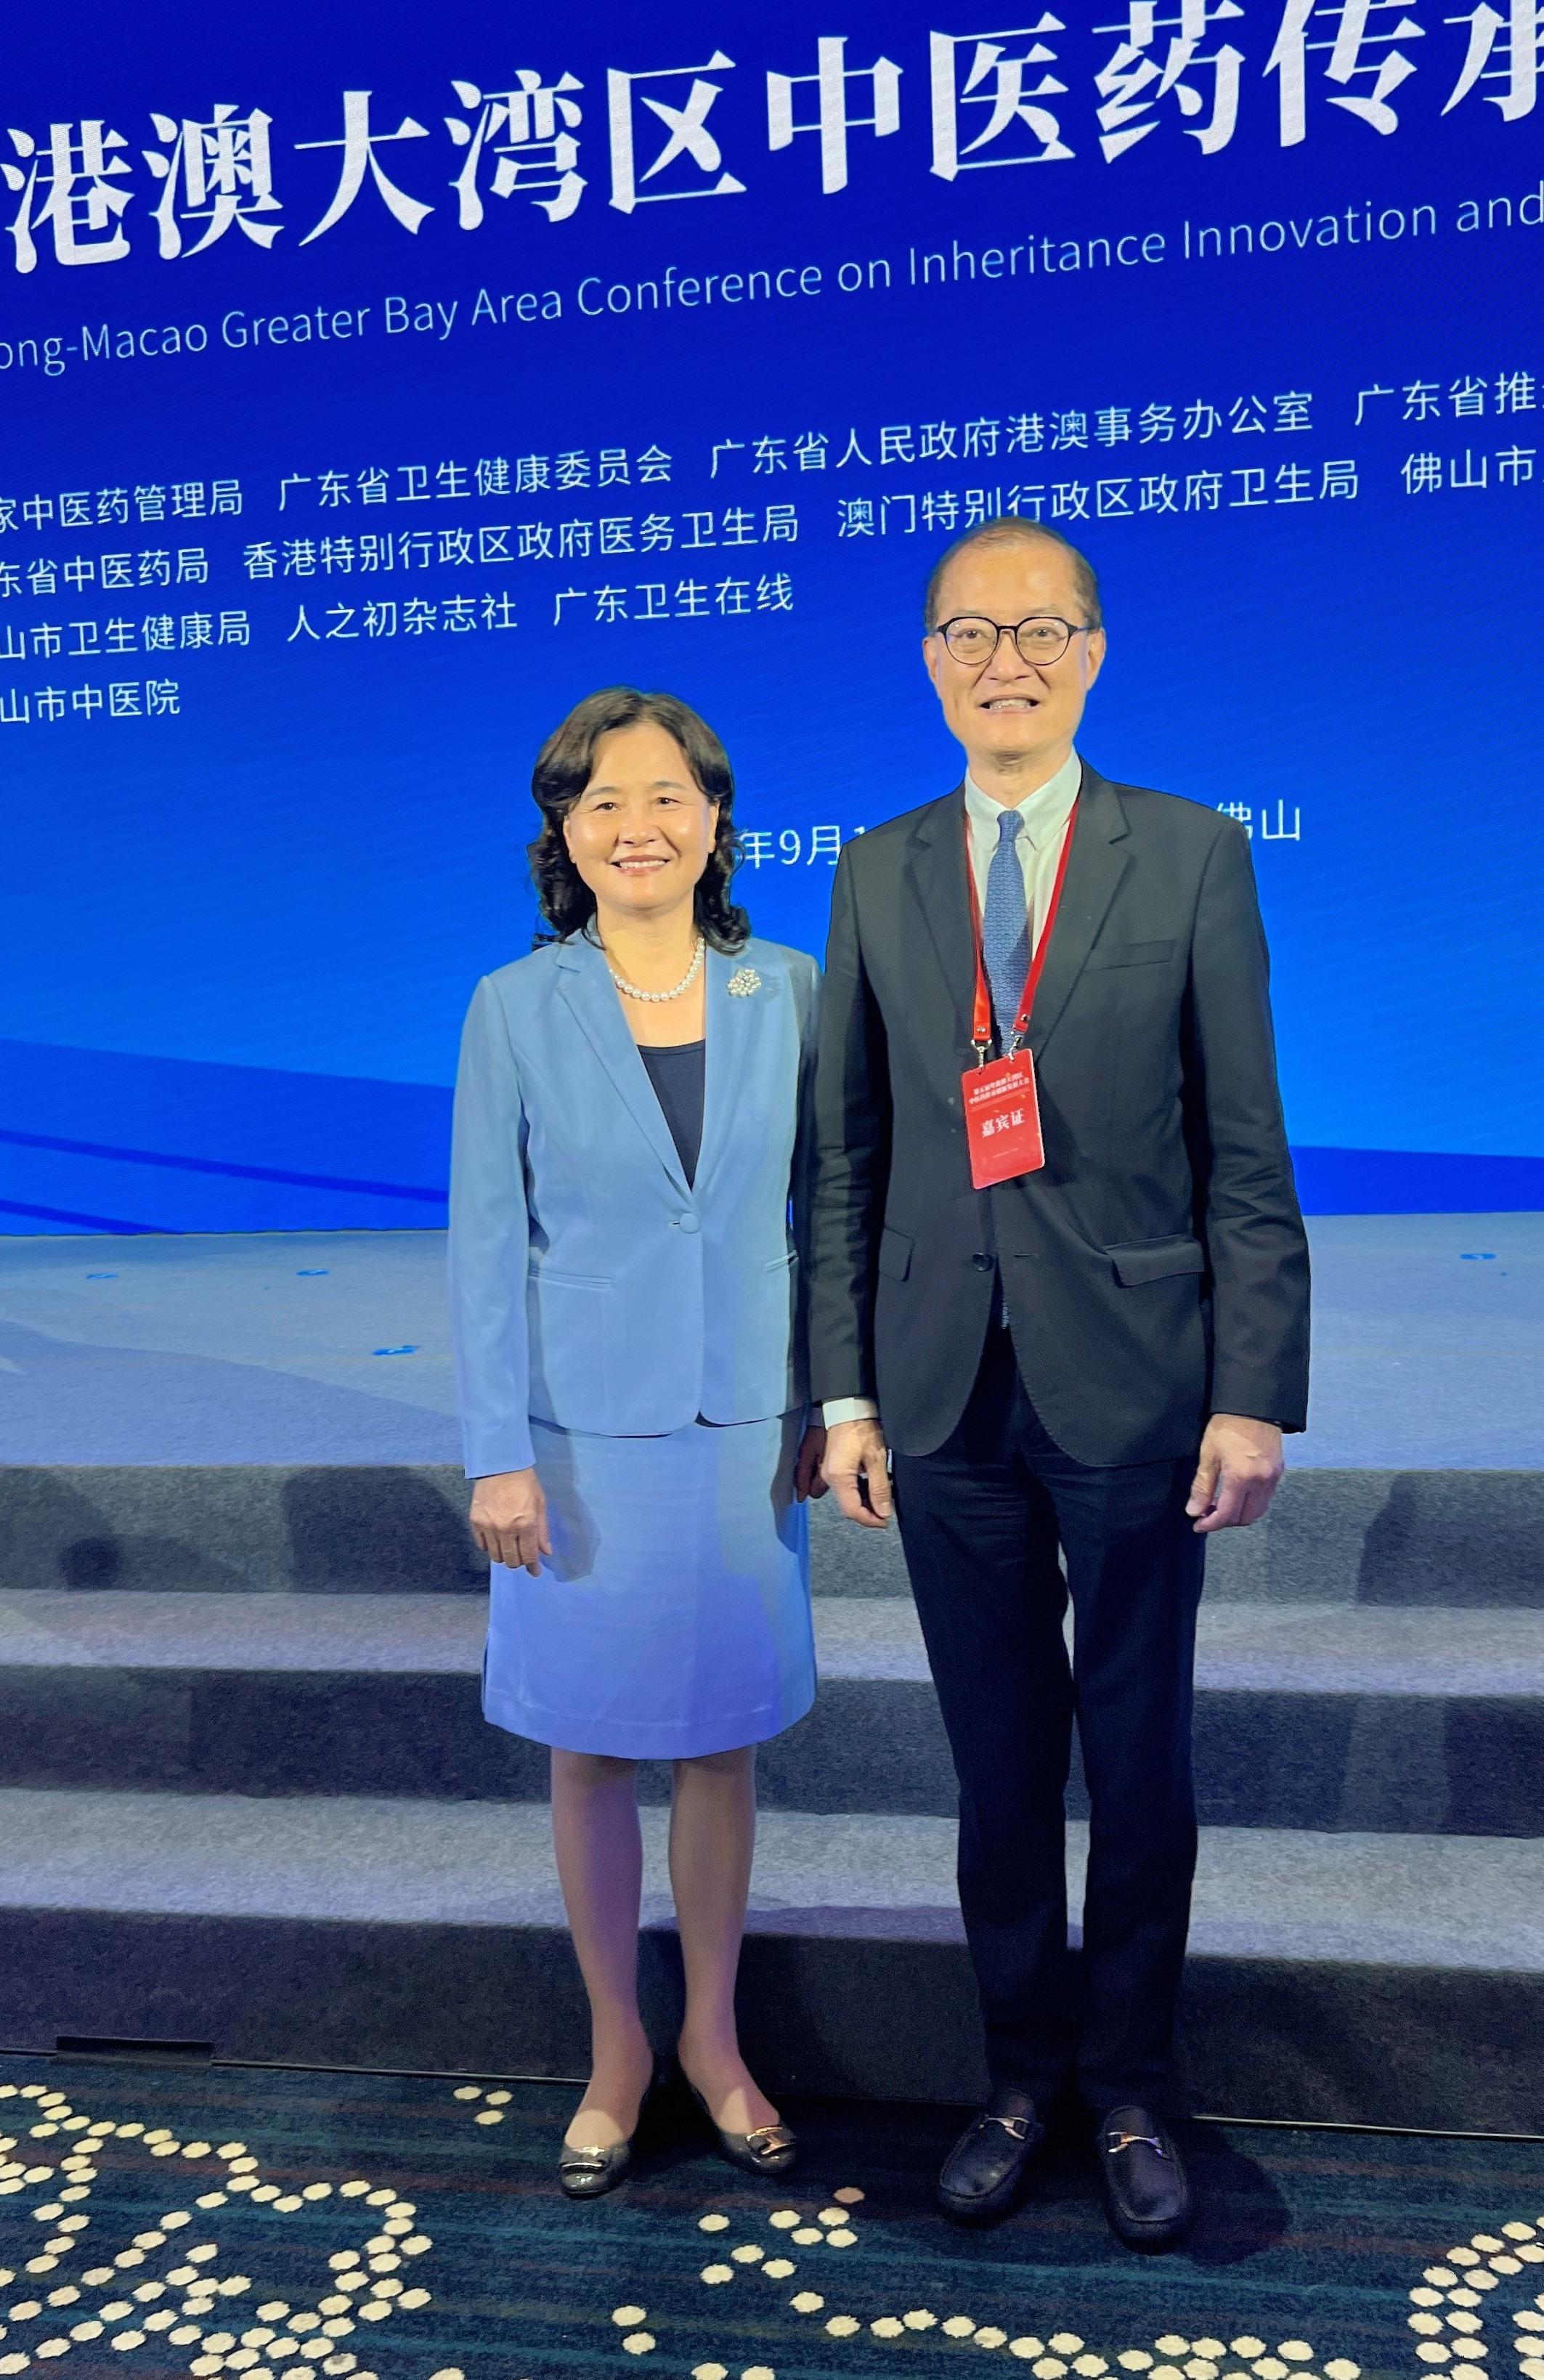 The Secretary for Health, Professor Lo Chung-mau, attended the 5th Guangdong-Hong Kong-Macao Greater Bay Area Conference on Inheritance, Innovation and Development of Traditional Chinese Medicine held in Foshan today (September 14). Photo shows Professor Lo (right) and the Party Group Member of the National Health Commission cum Party Secretary and Commissioner of the National Administration of Traditional Chinese Medicine, Professor Yu Yanhong (left), at the opening ceremony. 